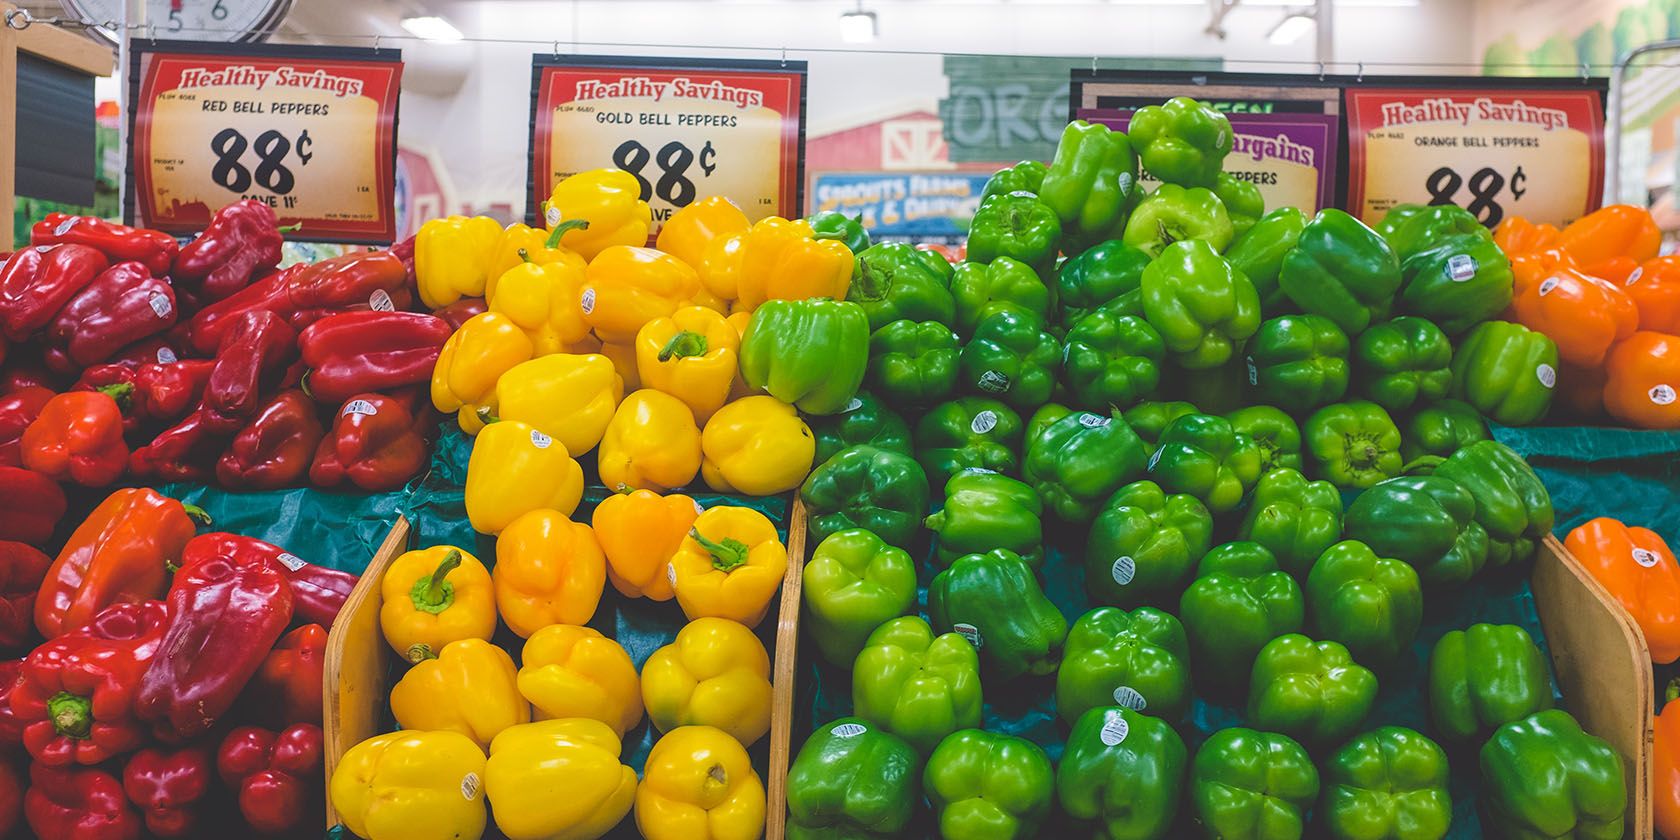 Bell peppers in a grocery store